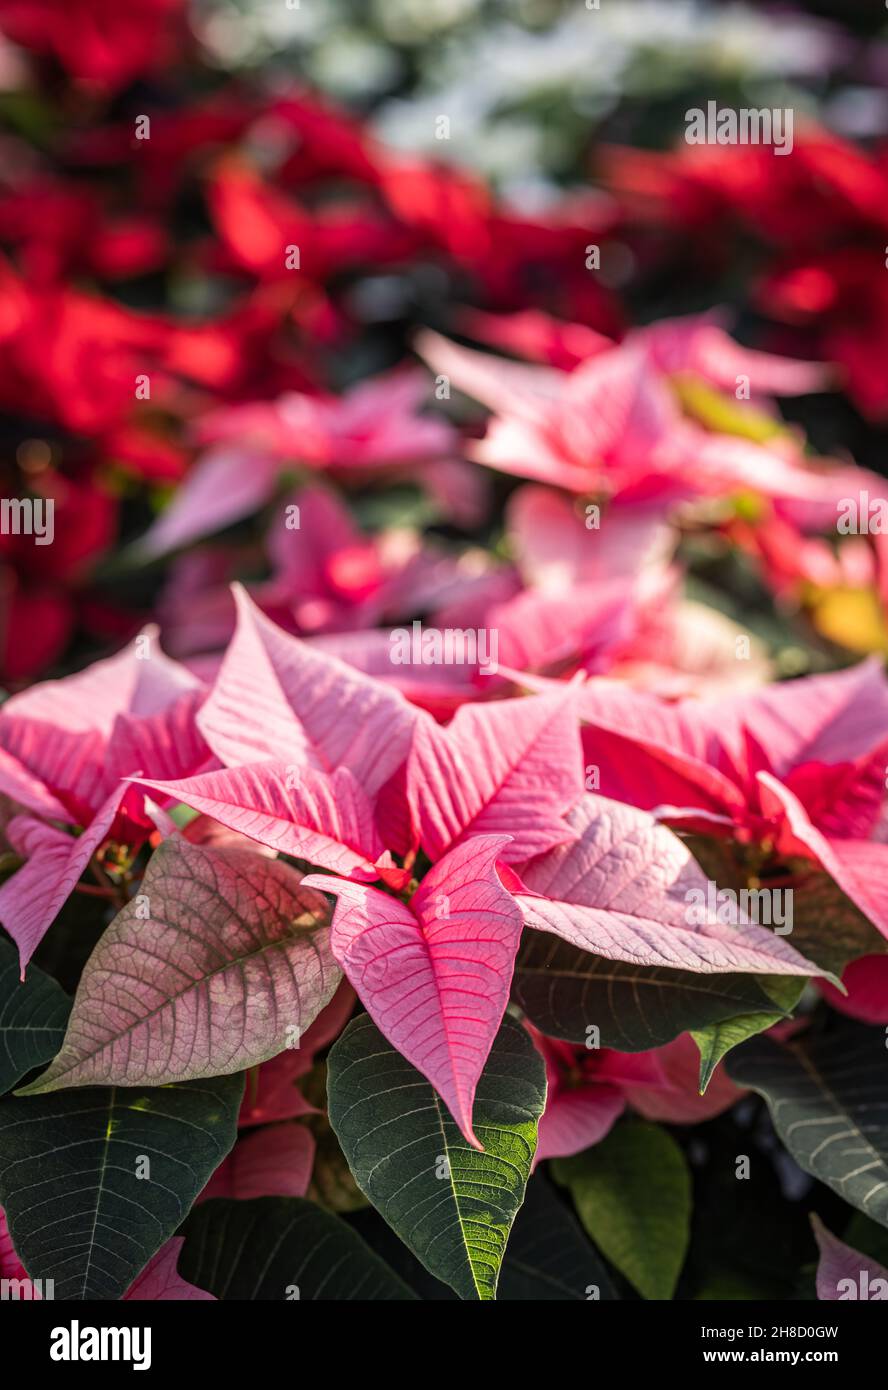 Poinsettia, Euporbia Pulcherrima at Meynell Langley Gardens getting ready for Christmas in focus Variety Christmas Feelings 'Pink' Stock Photo